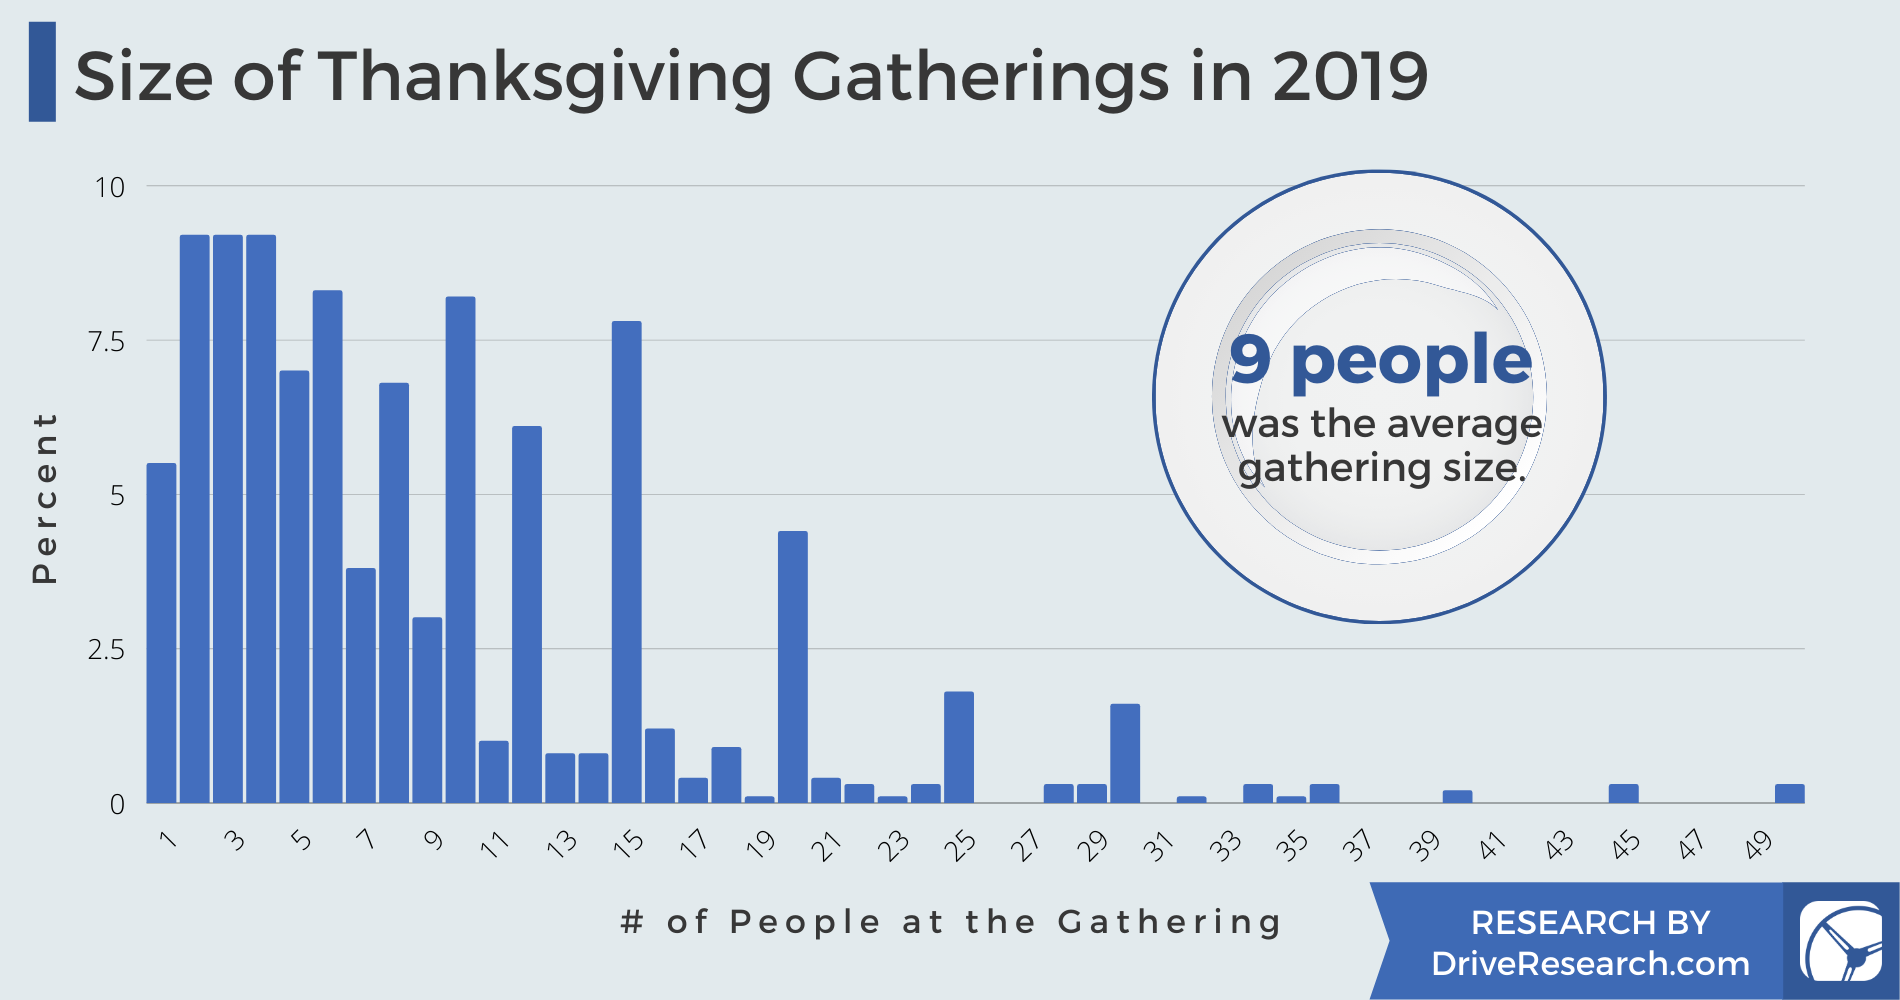 In 2019, respondents reported an average of 9 people at their Thanksgiving gathering.